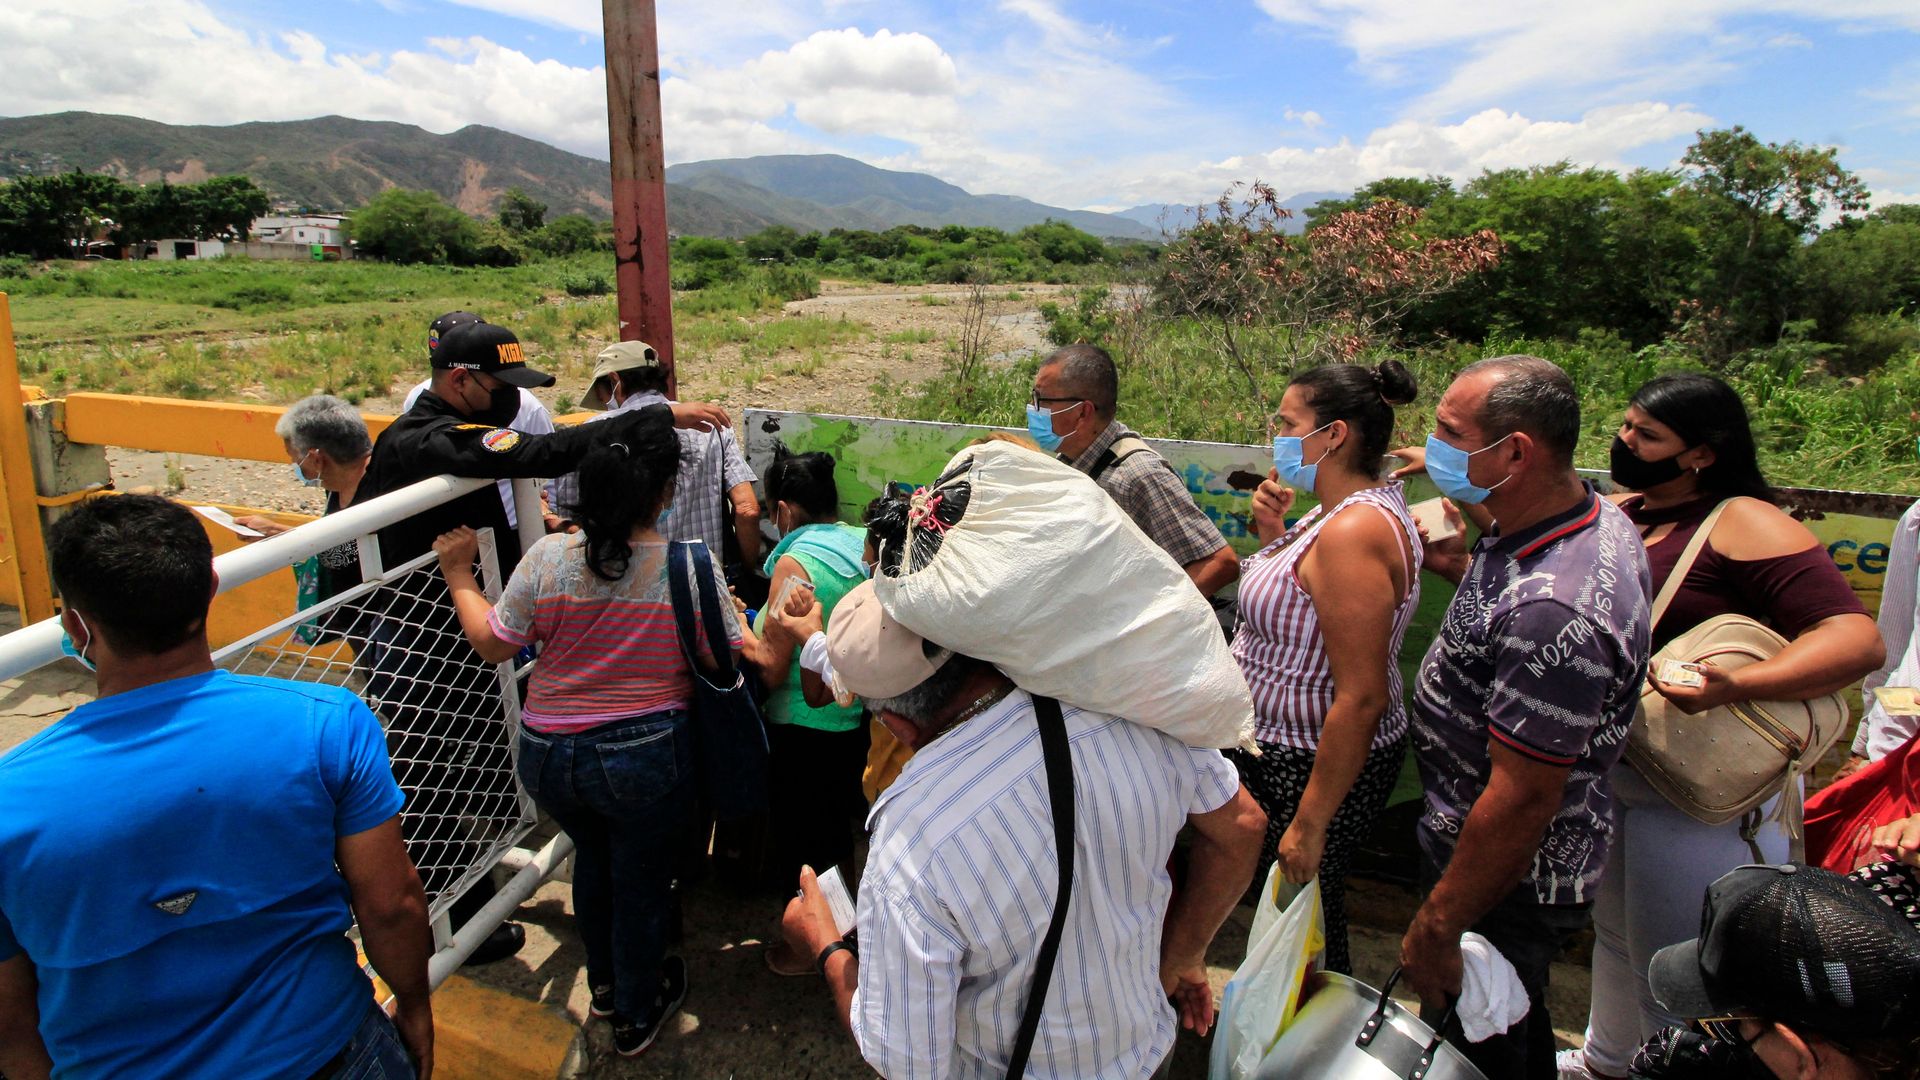  Venezuelan people at the Venezuela-Colombia border  on Monday, as officials prepare to remove containers that were placed as barricades between the two countries in 2019.